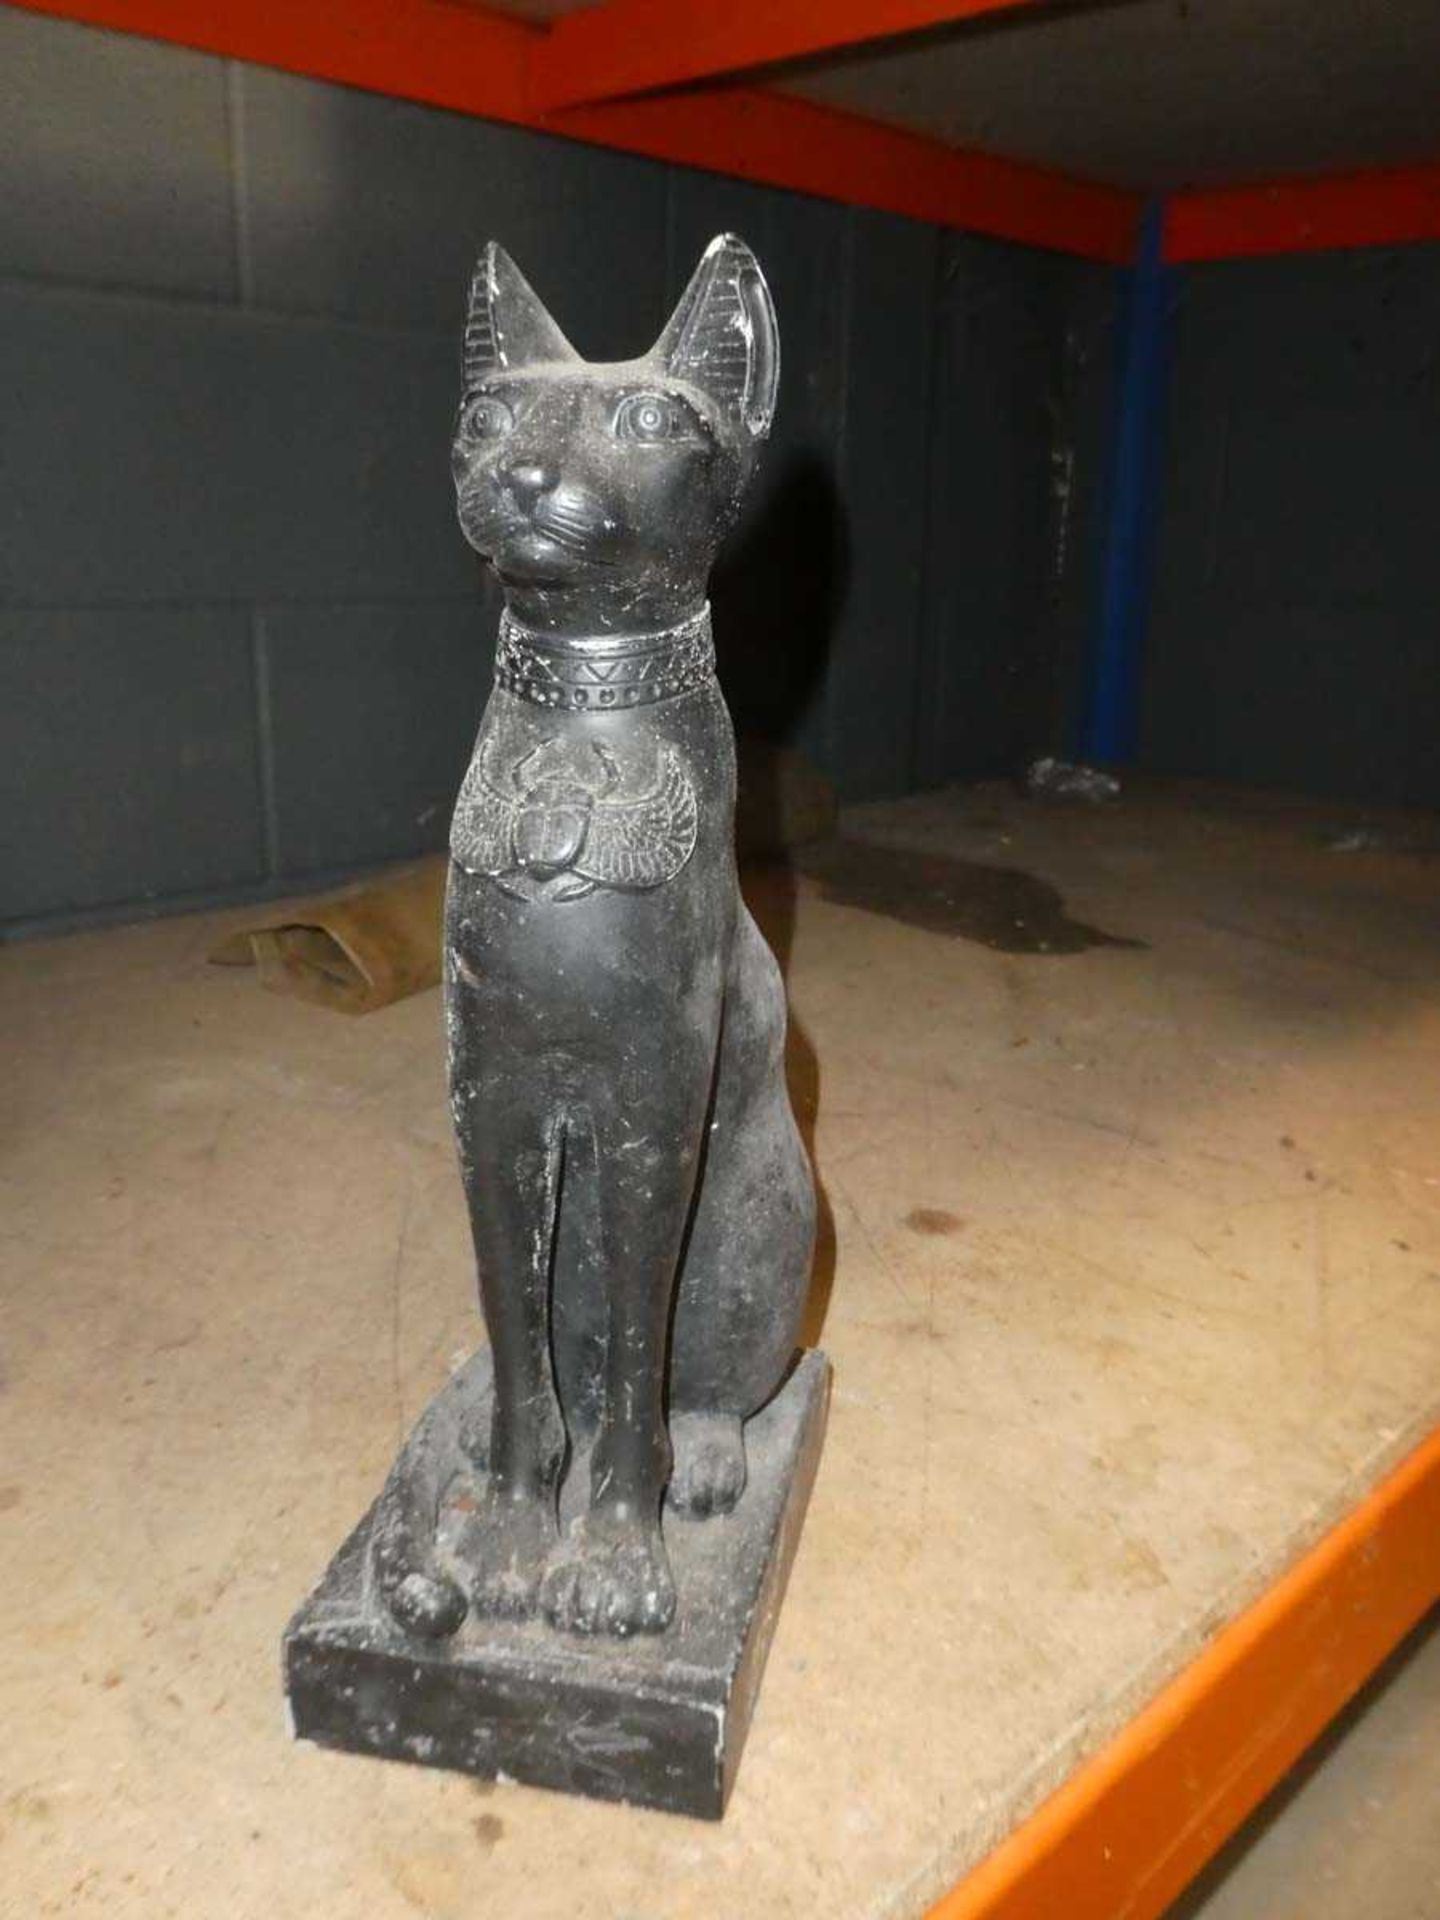 Small black statue of a cat